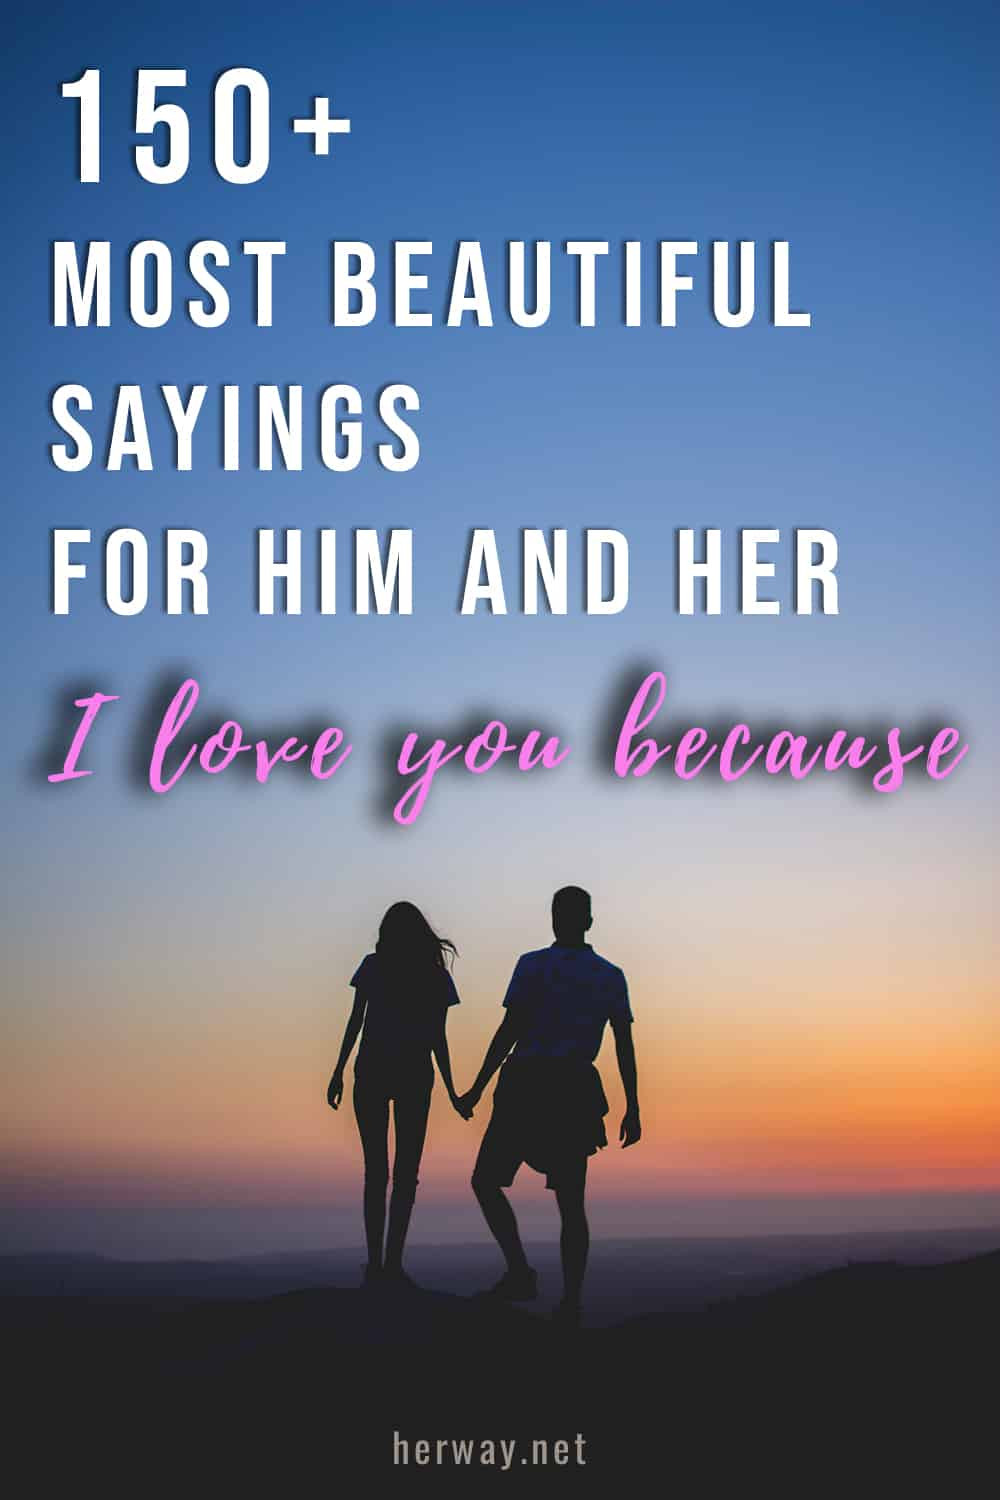 Most Romantic Quotes For Him
 I Love You Because 150 Most Beautiful Sayings For Him